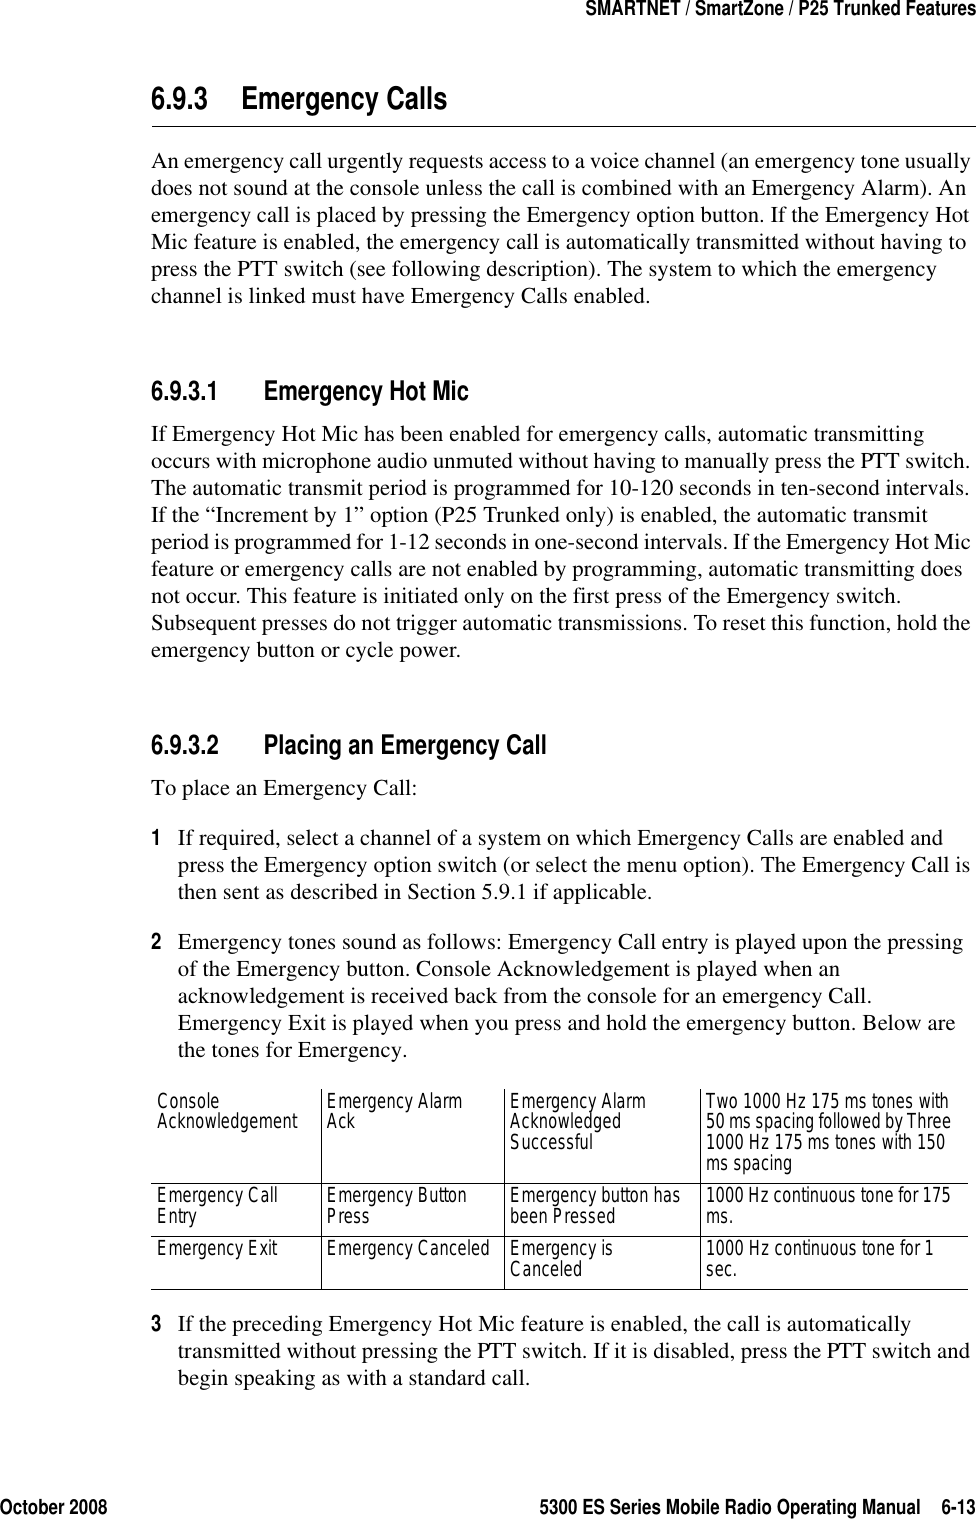 October 2008 5300 ES Series Mobile Radio Operating Manual 6-13SMARTNET / SmartZone / P25 Trunked Features6.9.3 Emergency CallsAn emergency call urgently requests access to a voice channel (an emergency tone usually does not sound at the console unless the call is combined with an Emergency Alarm). An emergency call is placed by pressing the Emergency option button. If the Emergency Hot Mic feature is enabled, the emergency call is automatically transmitted without having to press the PTT switch (see following description). The system to which the emergency channel is linked must have Emergency Calls enabled.6.9.3.1 Emergency Hot MicIf Emergency Hot Mic has been enabled for emergency calls, automatic transmitting occurs with microphone audio unmuted without having to manually press the PTT switch. The automatic transmit period is programmed for 10-120 seconds in ten-second intervals. If the “Increment by 1” option (P25 Trunked only) is enabled, the automatic transmit period is programmed for 1-12 seconds in one-second intervals. If the Emergency Hot Mic feature or emergency calls are not enabled by programming, automatic transmitting does not occur. This feature is initiated only on the first press of the Emergency switch. Subsequent presses do not trigger automatic transmissions. To reset this function, hold the emergency button or cycle power.6.9.3.2 Placing an Emergency CallTo place an Emergency Call:1If required, select a channel of a system on which Emergency Calls are enabled and press the Emergency option switch (or select the menu option). The Emergency Call is then sent as described in Section 5.9.1 if applicable.2Emergency tones sound as follows: Emergency Call entry is played upon the pressing of the Emergency button. Console Acknowledgement is played when an acknowledgement is received back from the console for an emergency Call. Emergency Exit is played when you press and hold the emergency button. Below are the tones for Emergency. 3If the preceding Emergency Hot Mic feature is enabled, the call is automatically transmitted without pressing the PTT switch. If it is disabled, press the PTT switch and begin speaking as with a standard call.Console Acknowledgement Emergency Alarm Ack Emergency Alarm Acknowledged SuccessfulTwo 1000 Hz 175 ms tones with 50 ms spacing followed by Three 1000 Hz 175 ms tones with 150 ms spacingEmergency Call Entry Emergency Button Press Emergency button has been Pressed 1000 Hz continuous tone for 175 ms.Emergency Exit Emergency Canceled Emergency is Canceled 1000 Hz continuous tone for 1 sec.